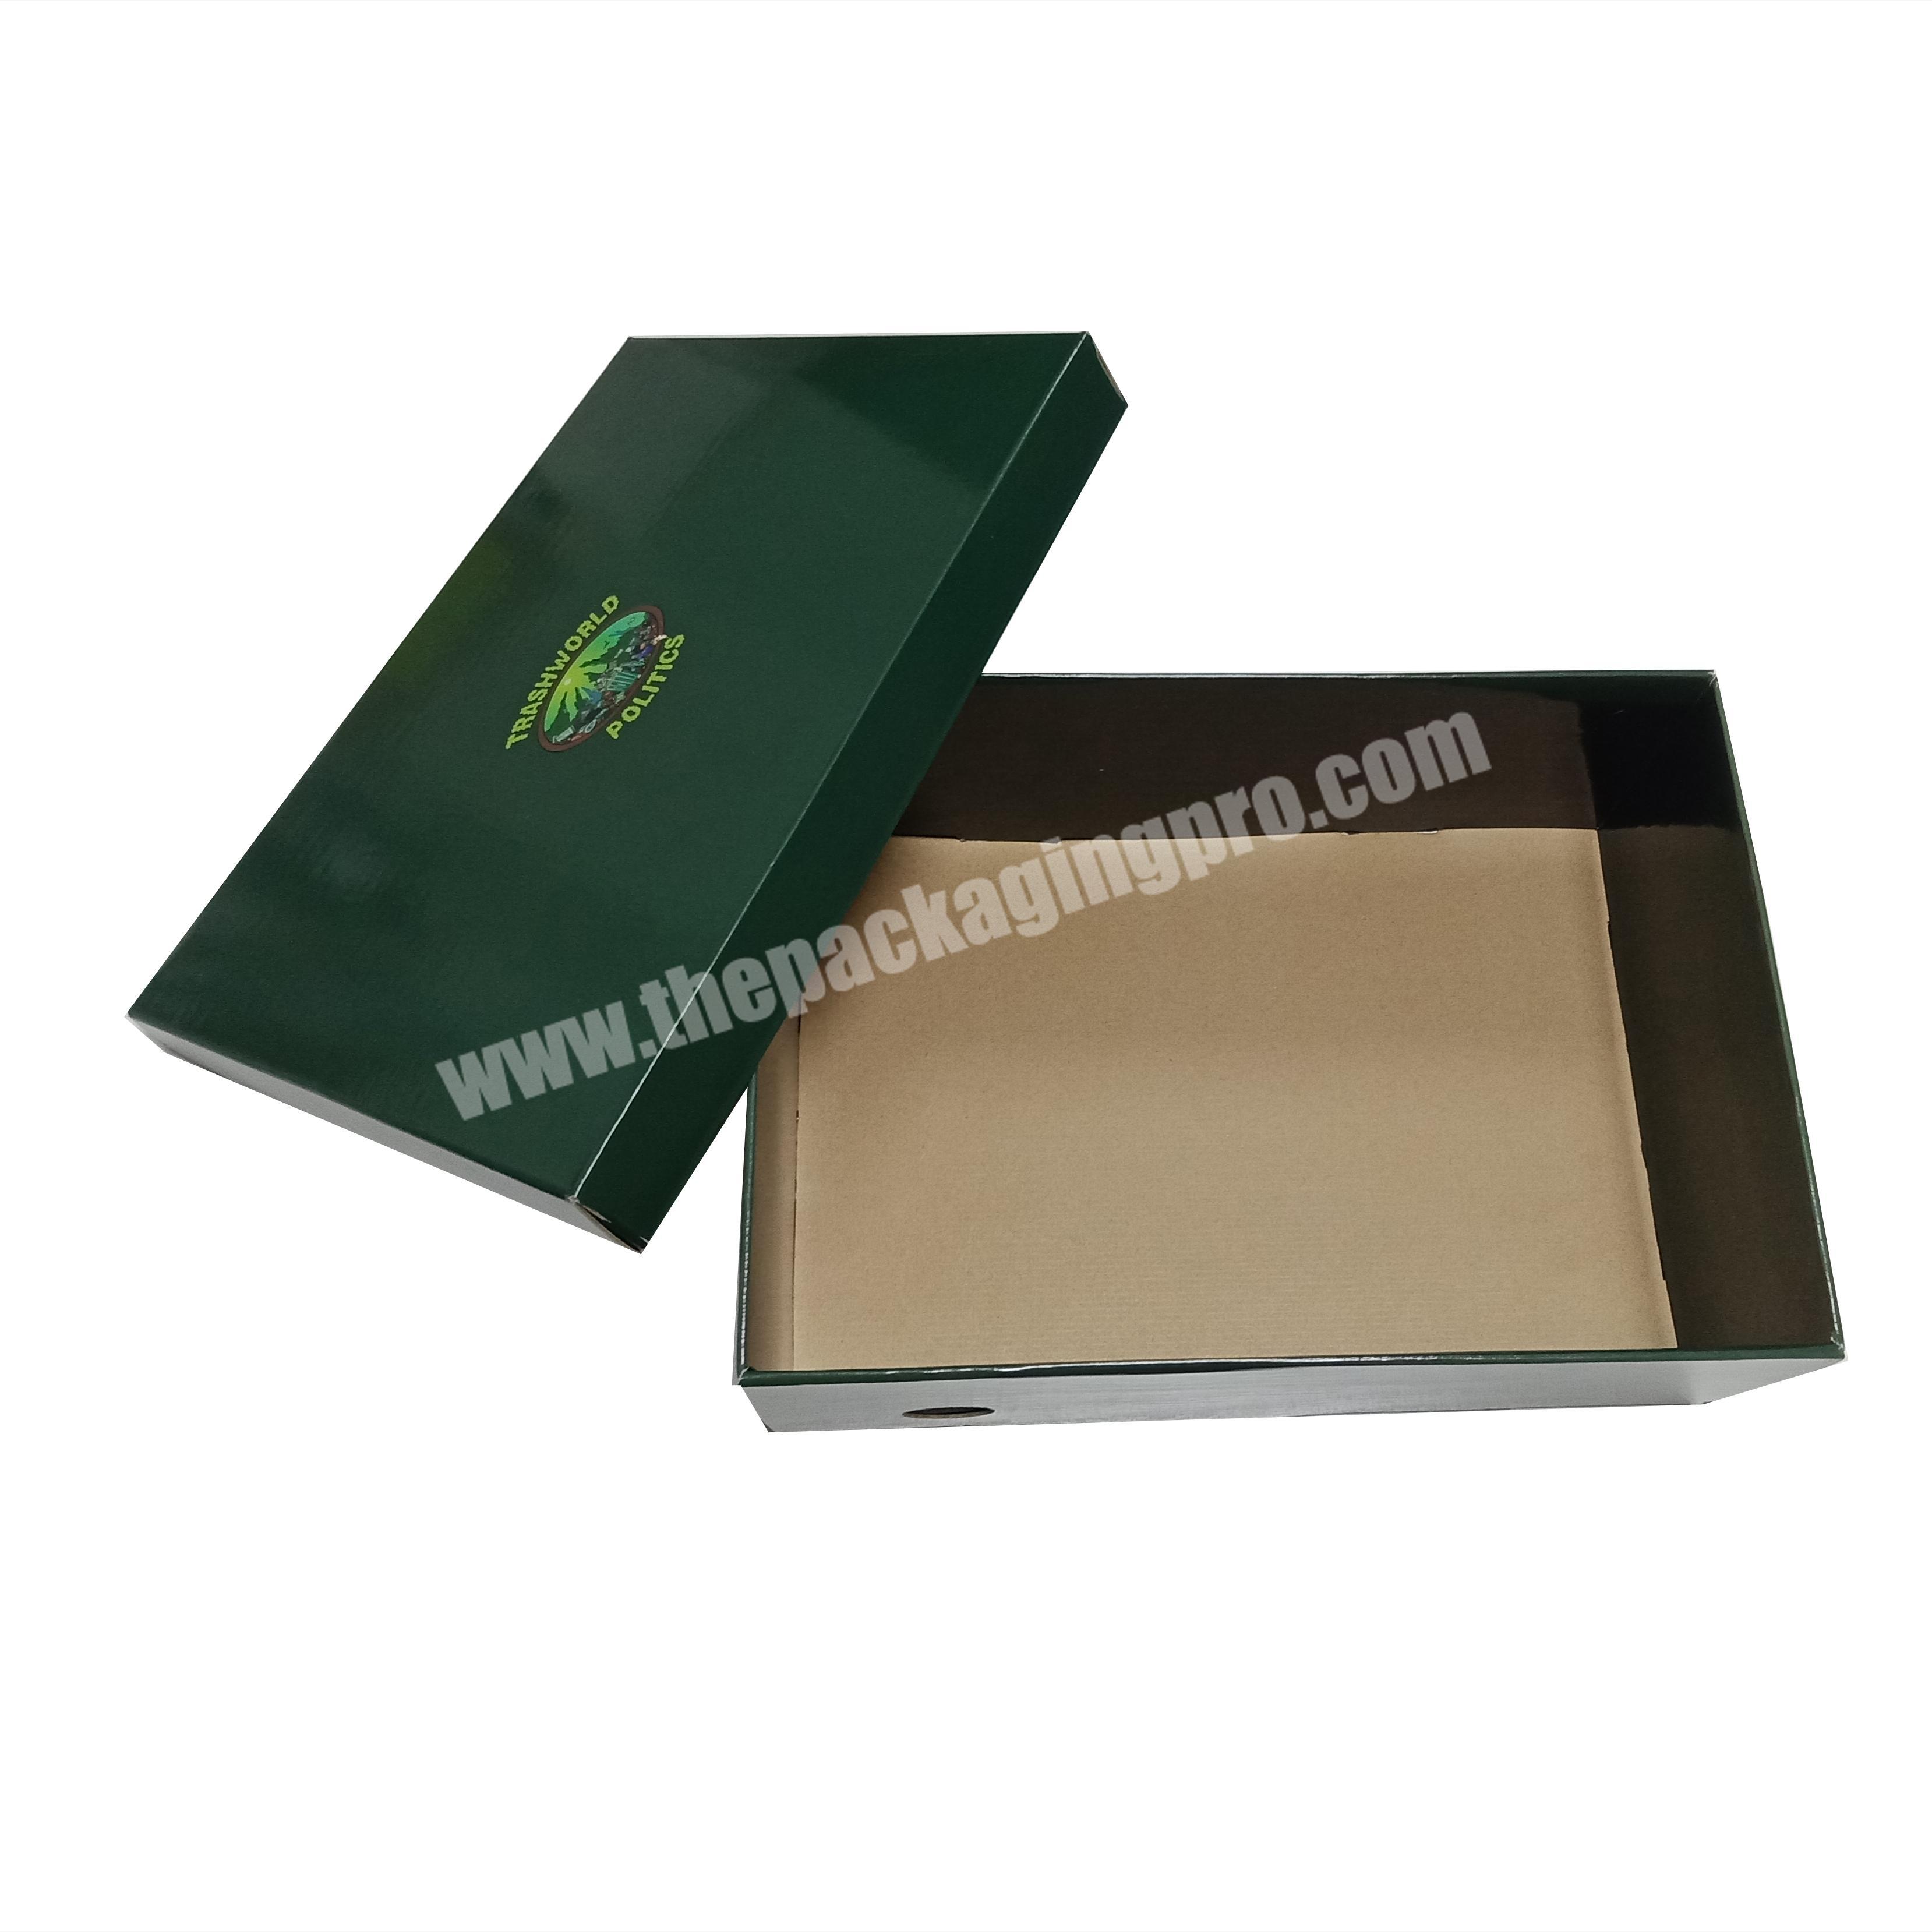 Kexin hot selling shoe box shipping packaging with logo kraft paper mailing box corrugated packaging box with lid